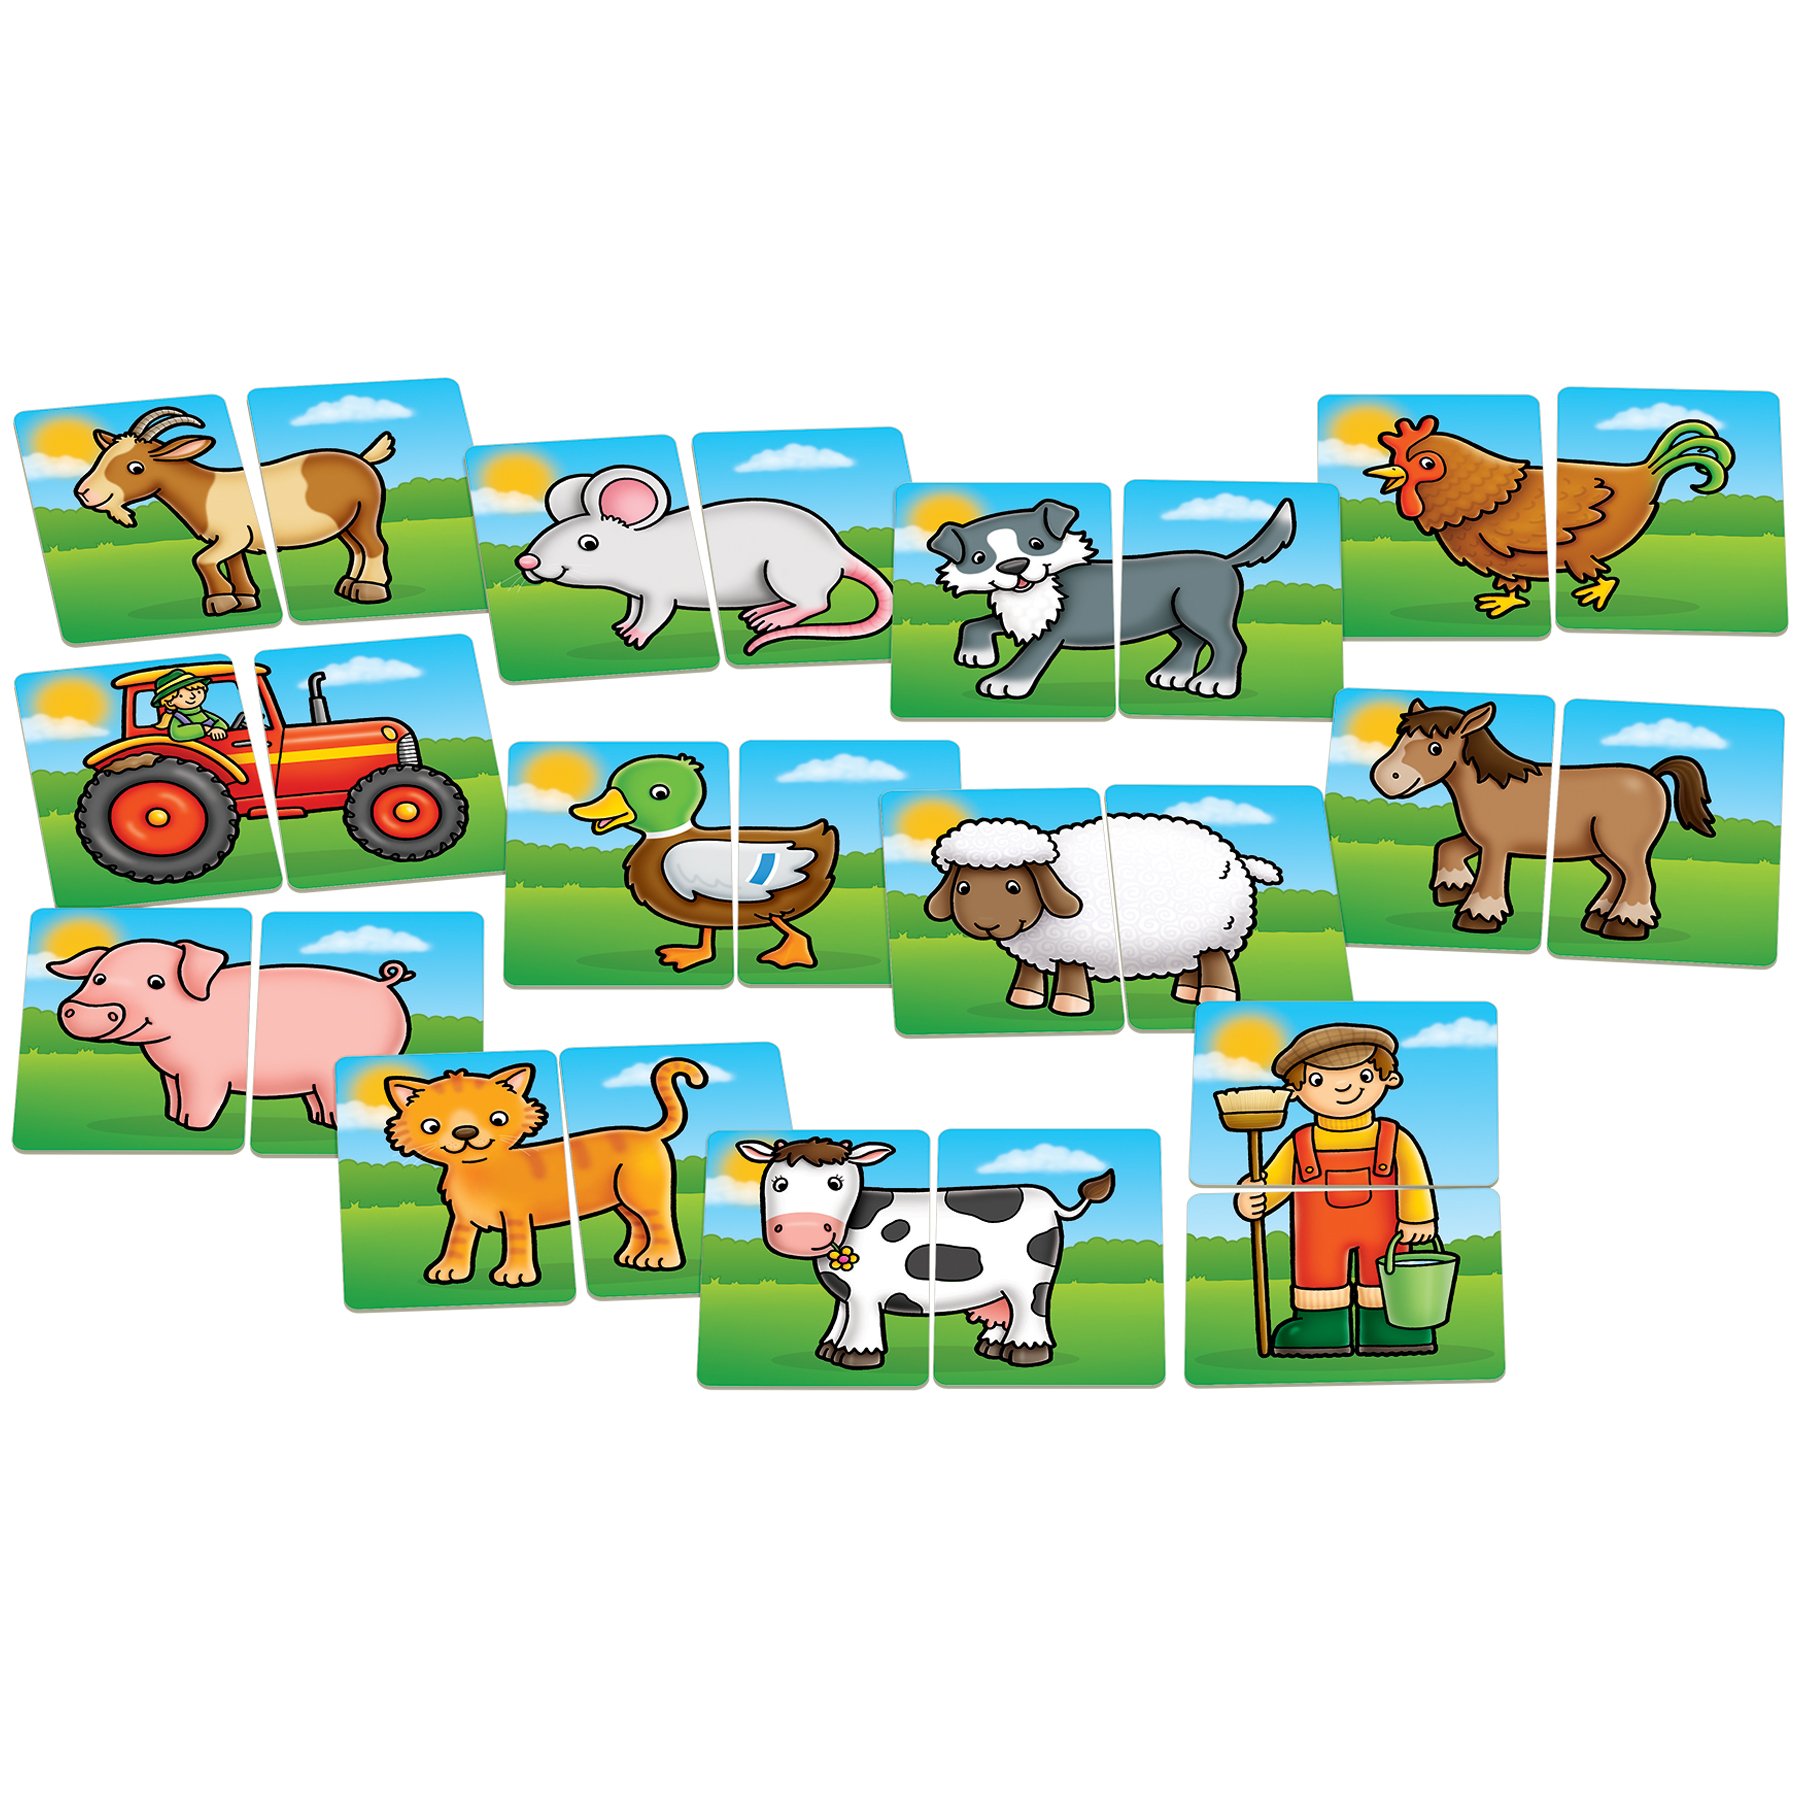 Orchard Toys Farmyard Heads and Tails Game, Memory & Matching Pairs Card Game, Educational Games and Toys for Toddler and Preschool, 18-Month-Old and Up